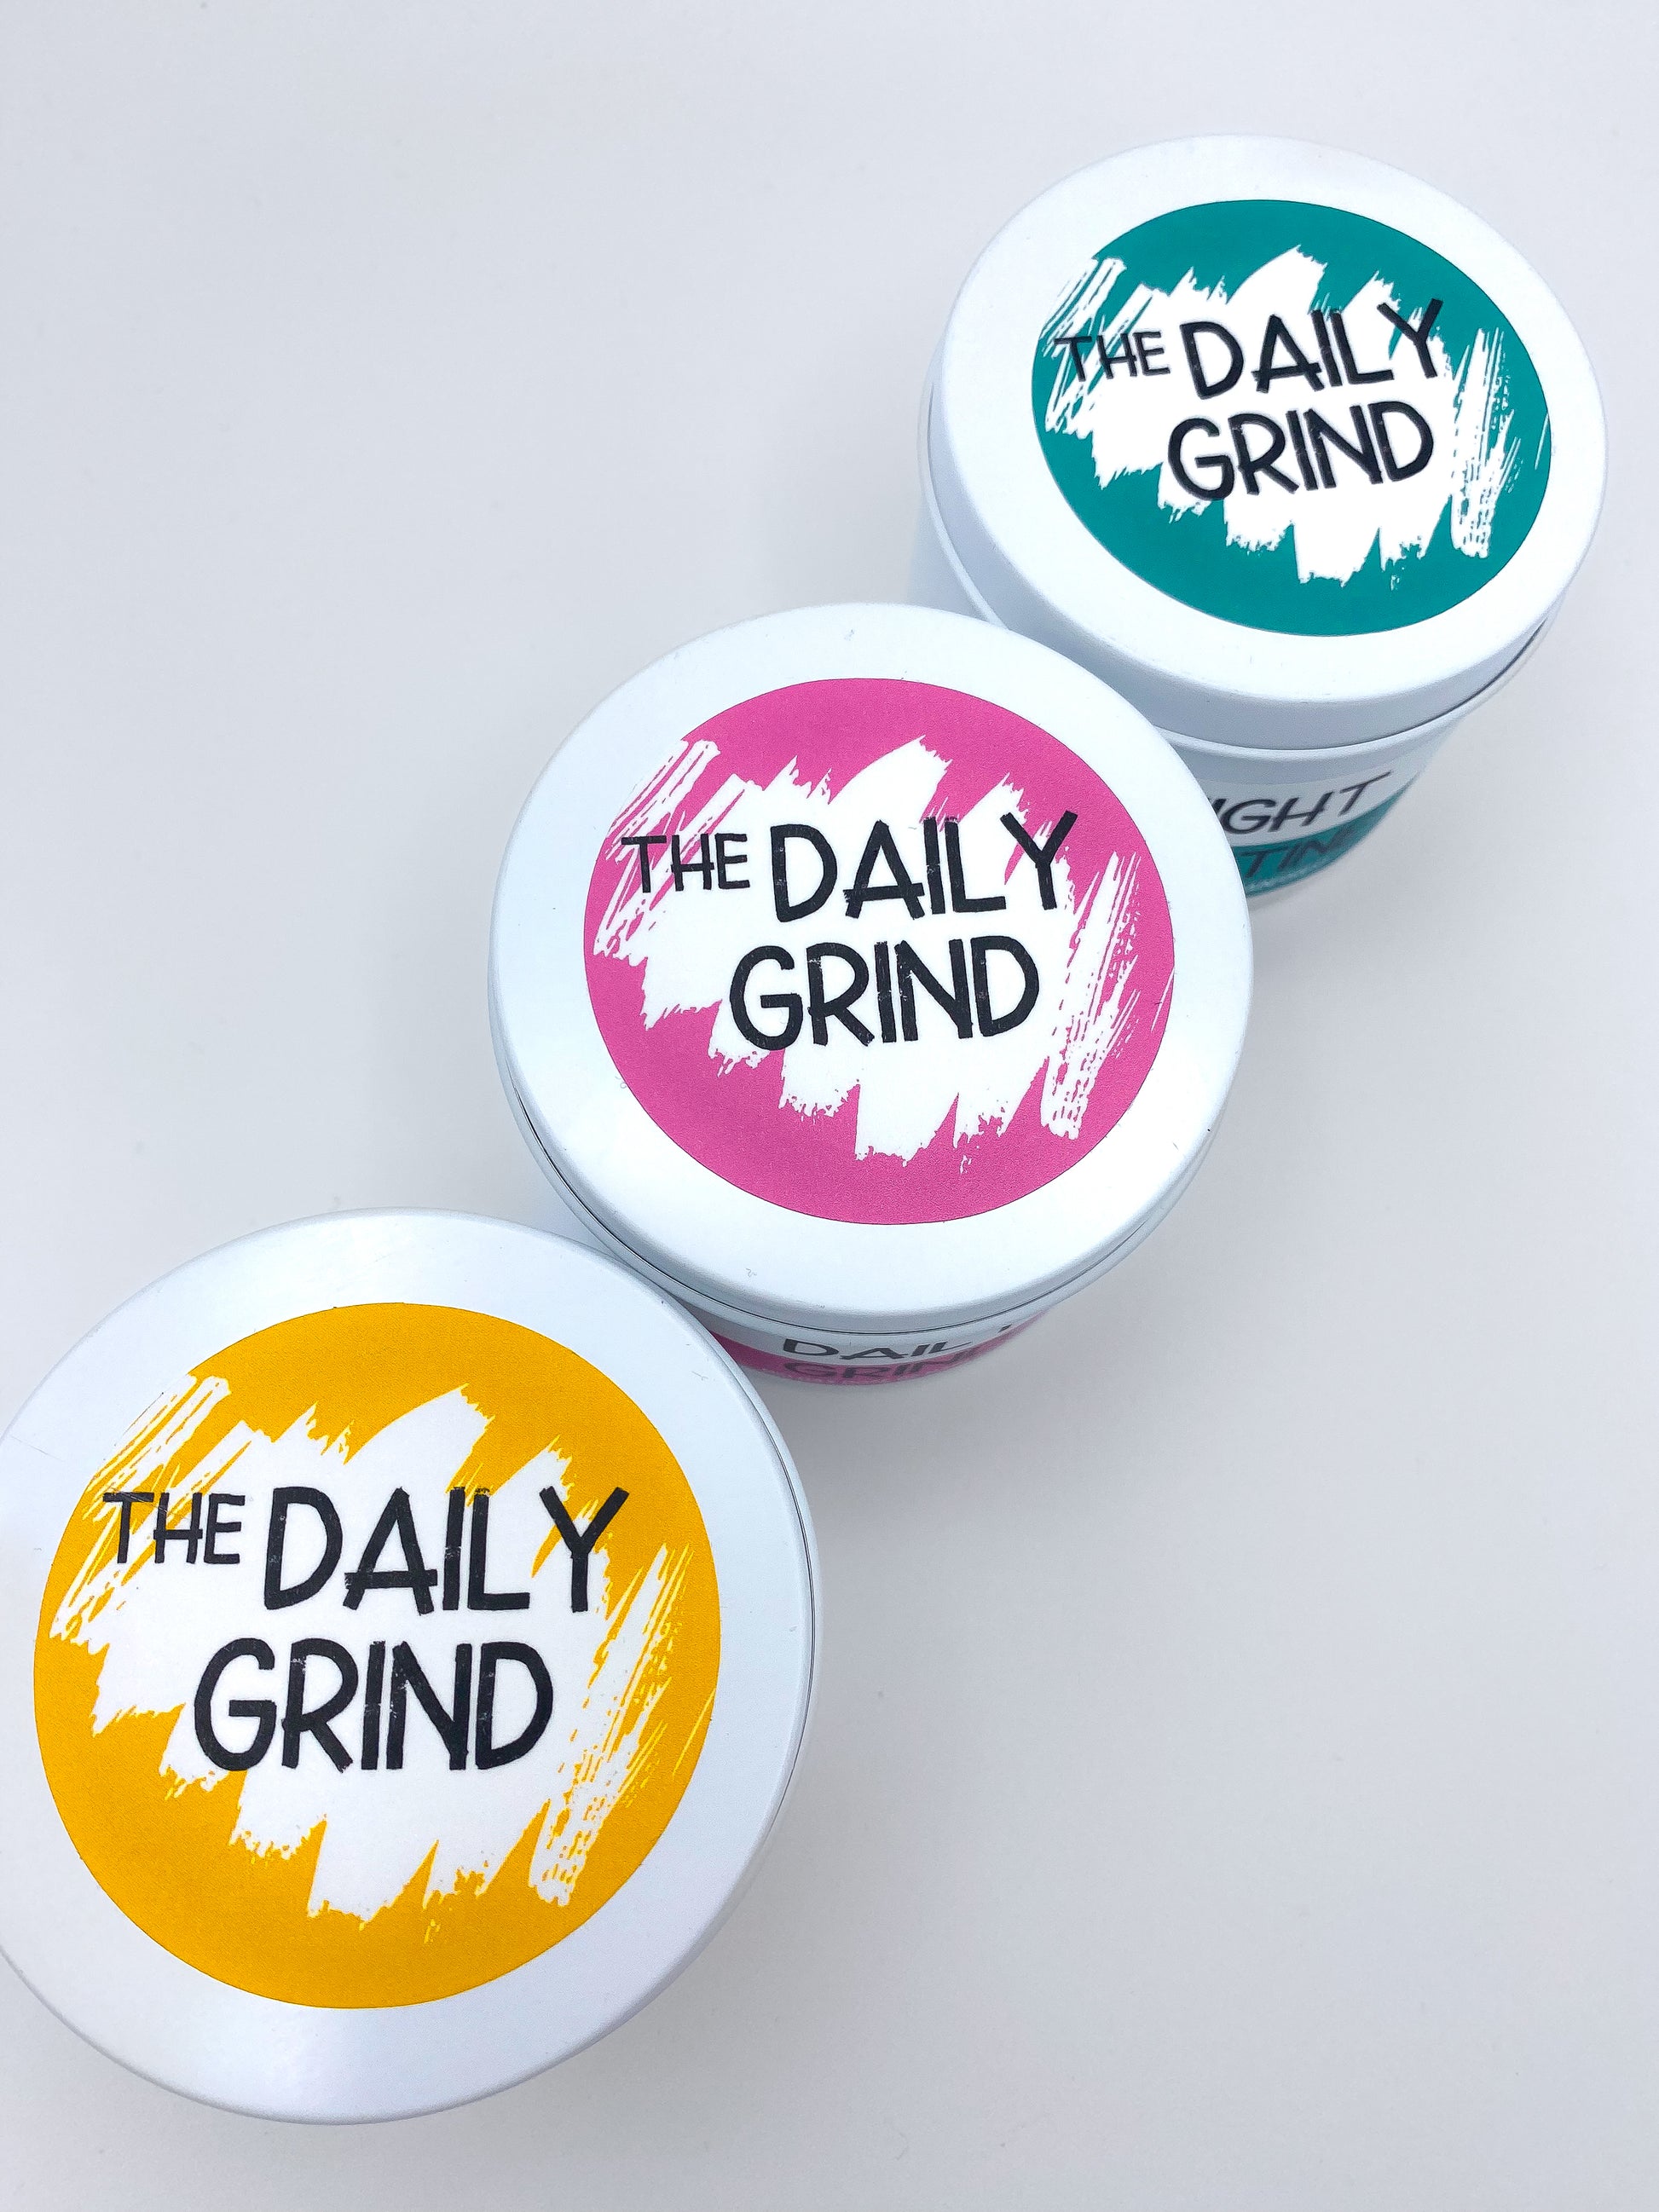 Lids of three candles with "The Daily Grind" labels